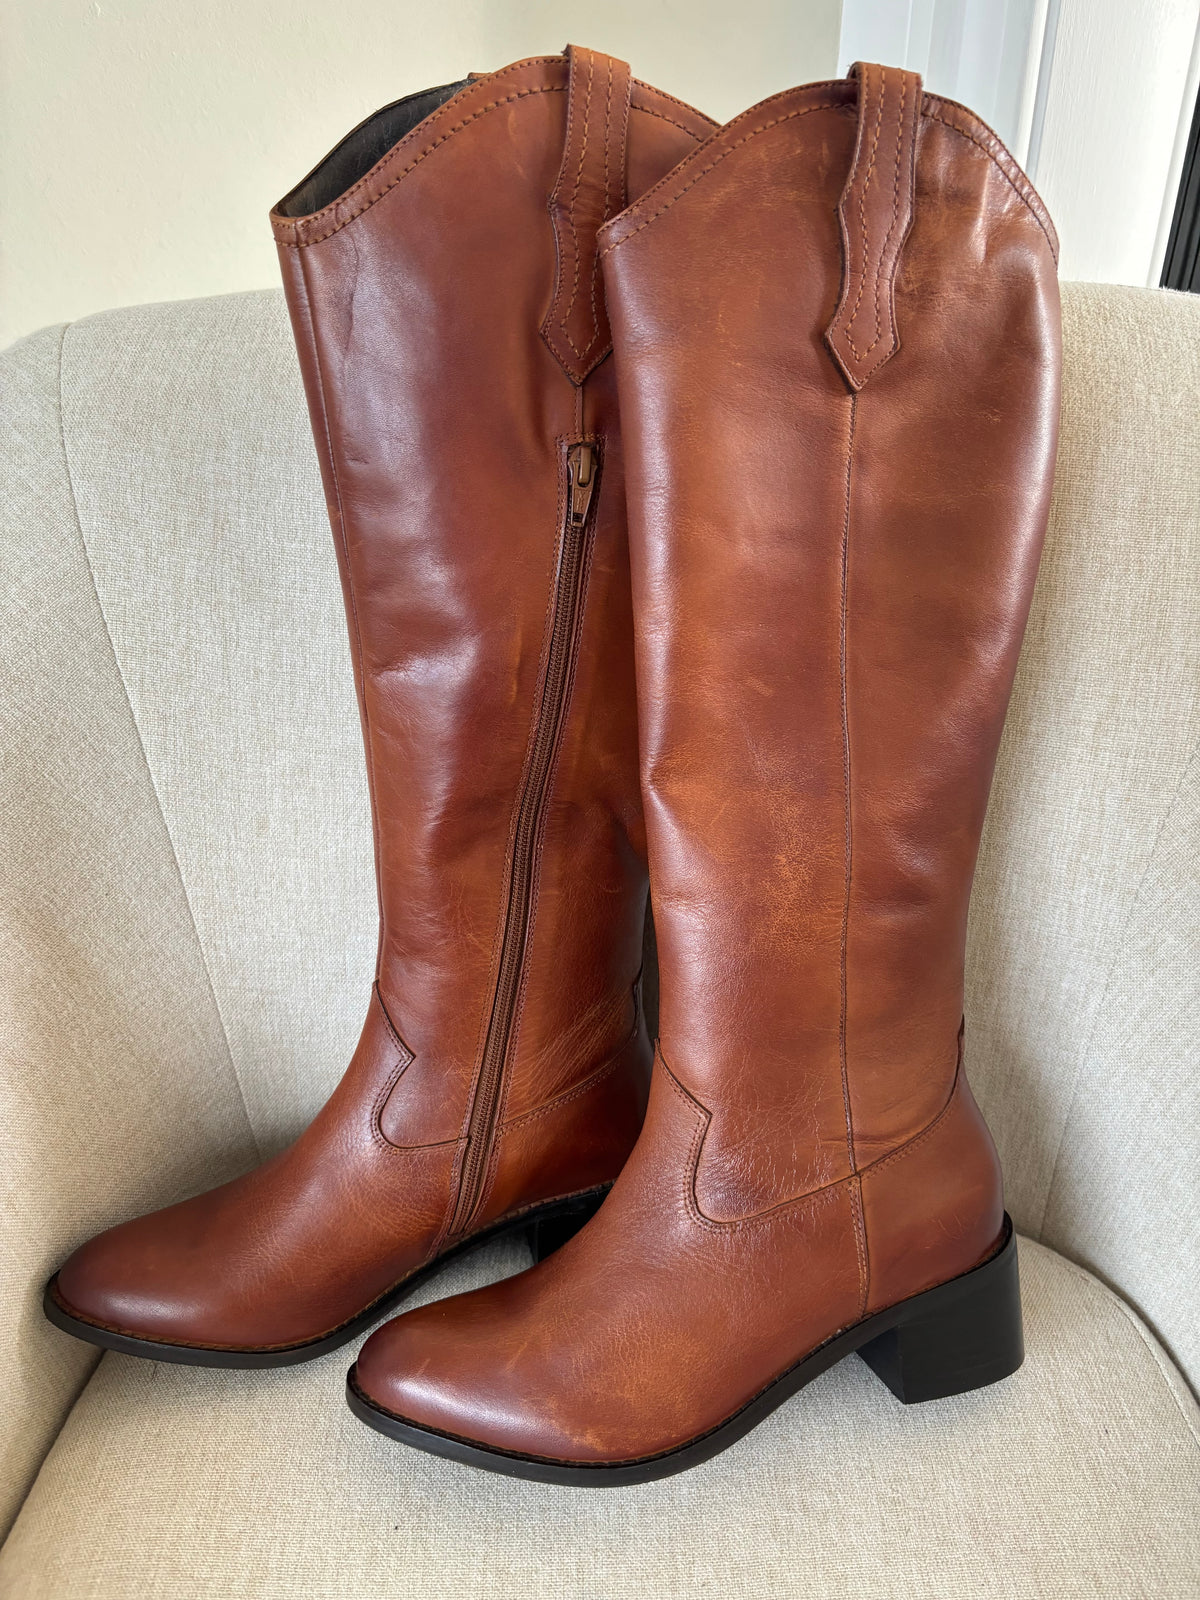 Tan Leather Ferns Knee High Boots by Ravel Size 5